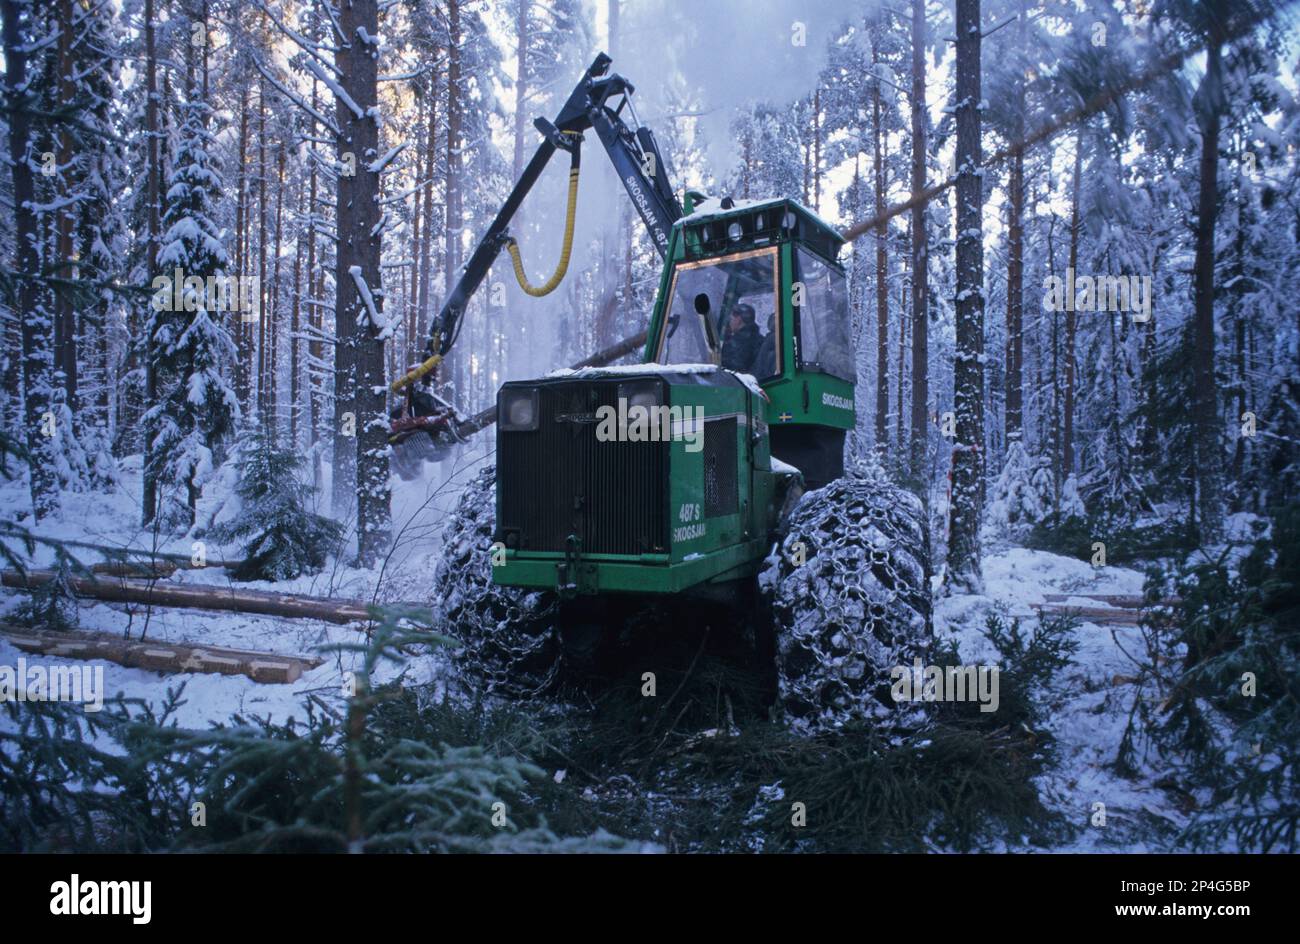 Forestry machine with chains on tyres, felling pine trees in snow covered plantation, Sweden Stock Photo